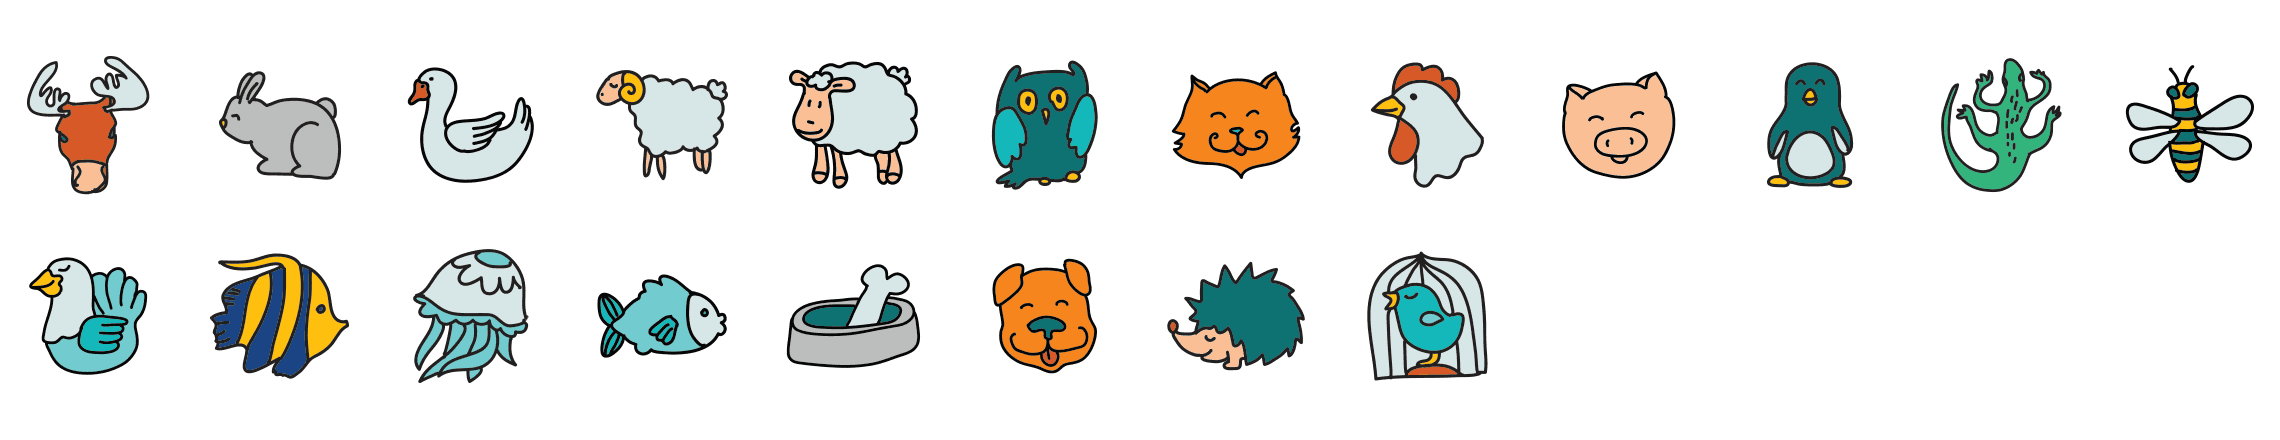 Animals-doodle-icons